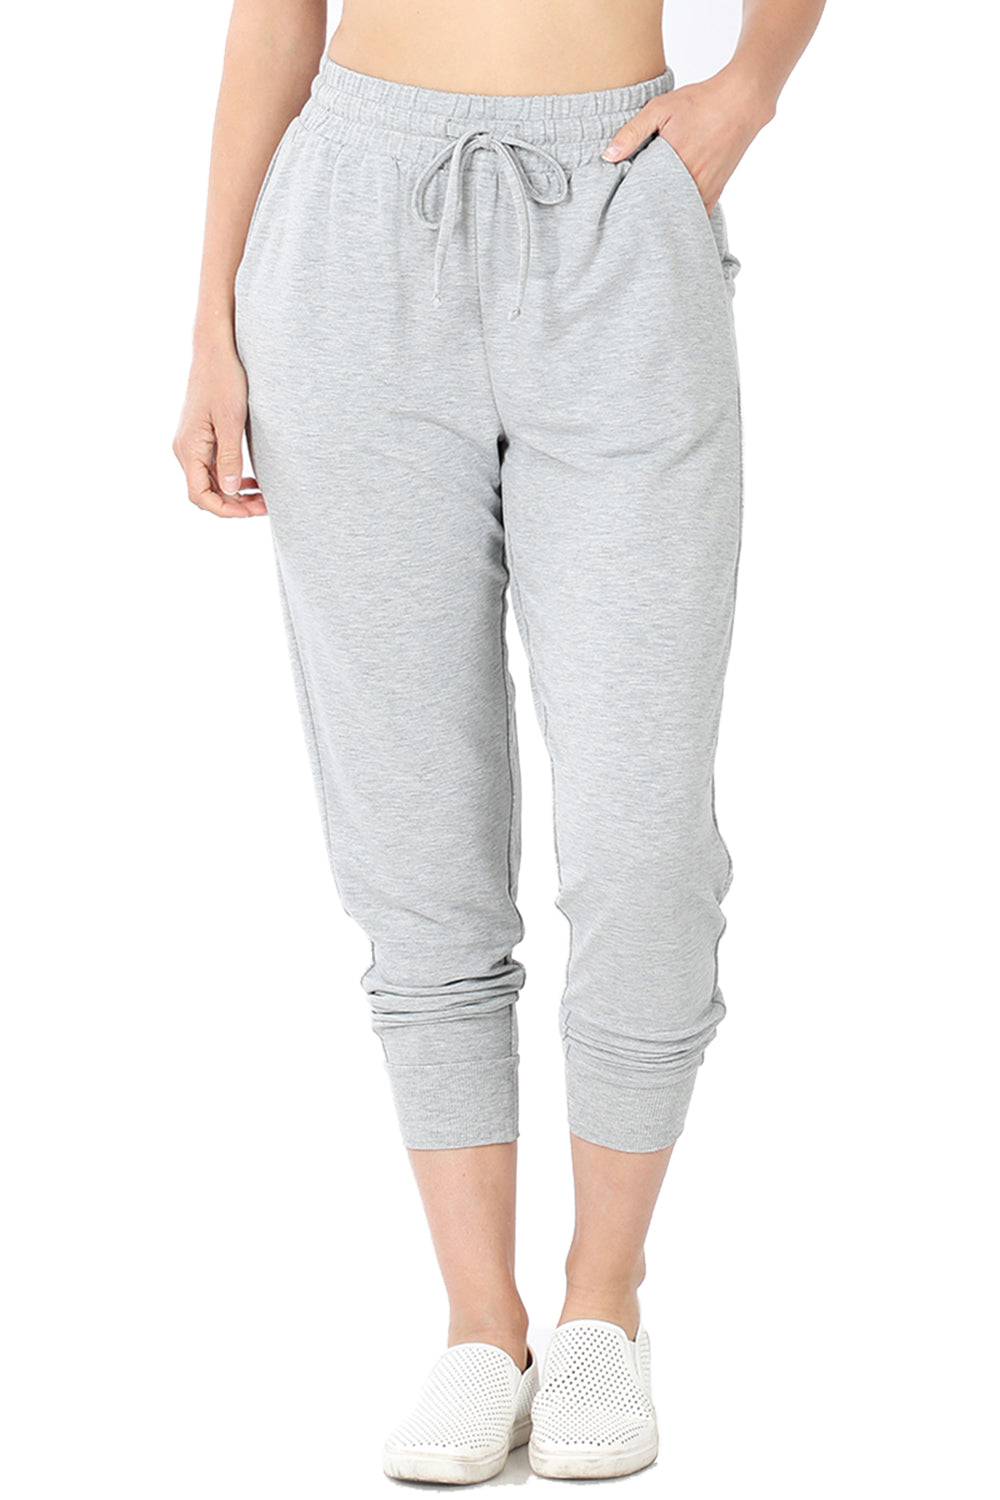 Women's French Terry Jogger Sweatpants with Pockets